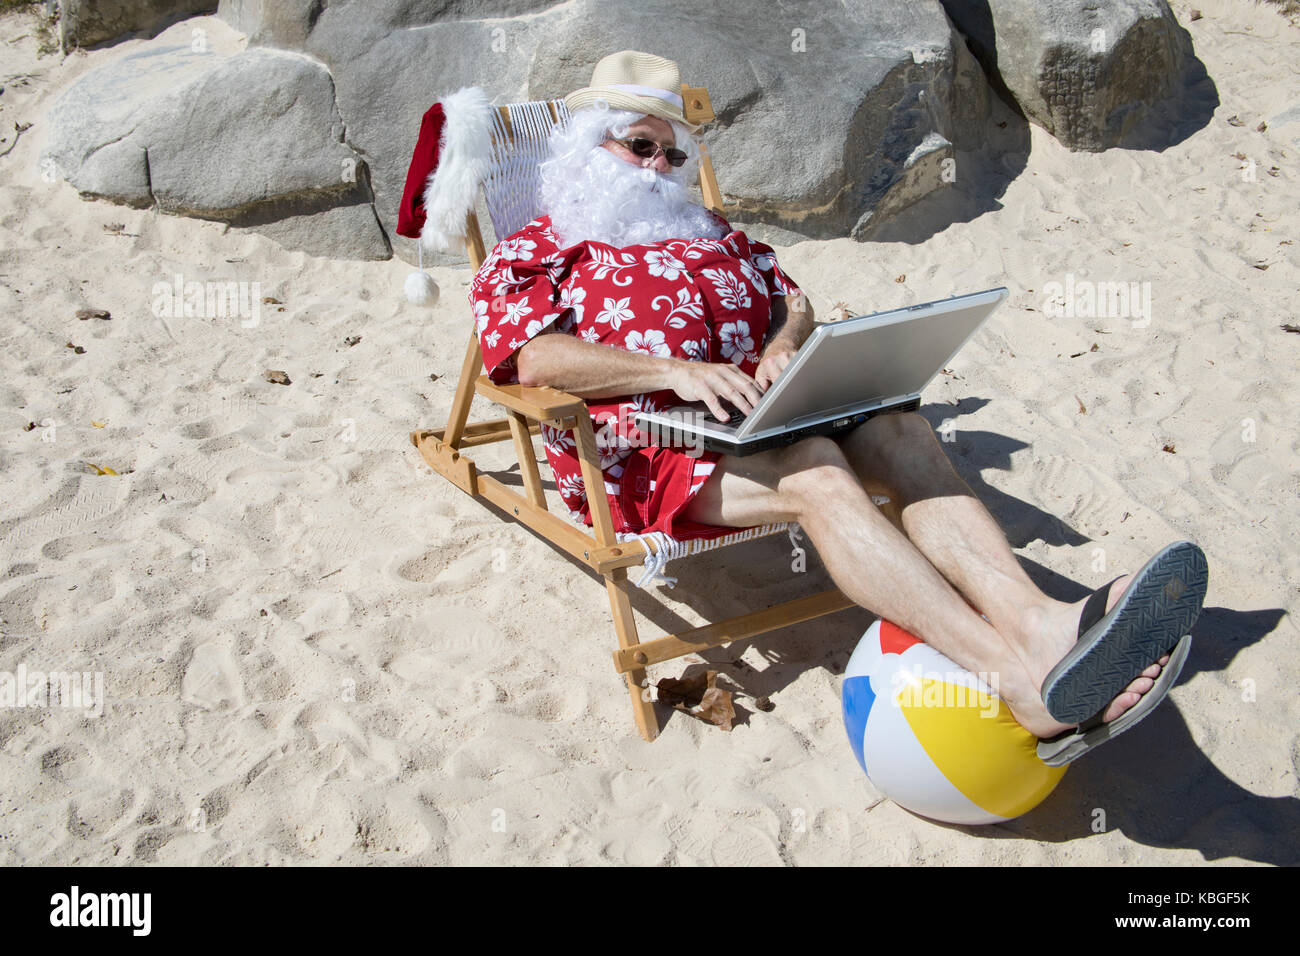 Santa Claus in red swimming trunks ans Hawaiian shirt lounging on sandy ...